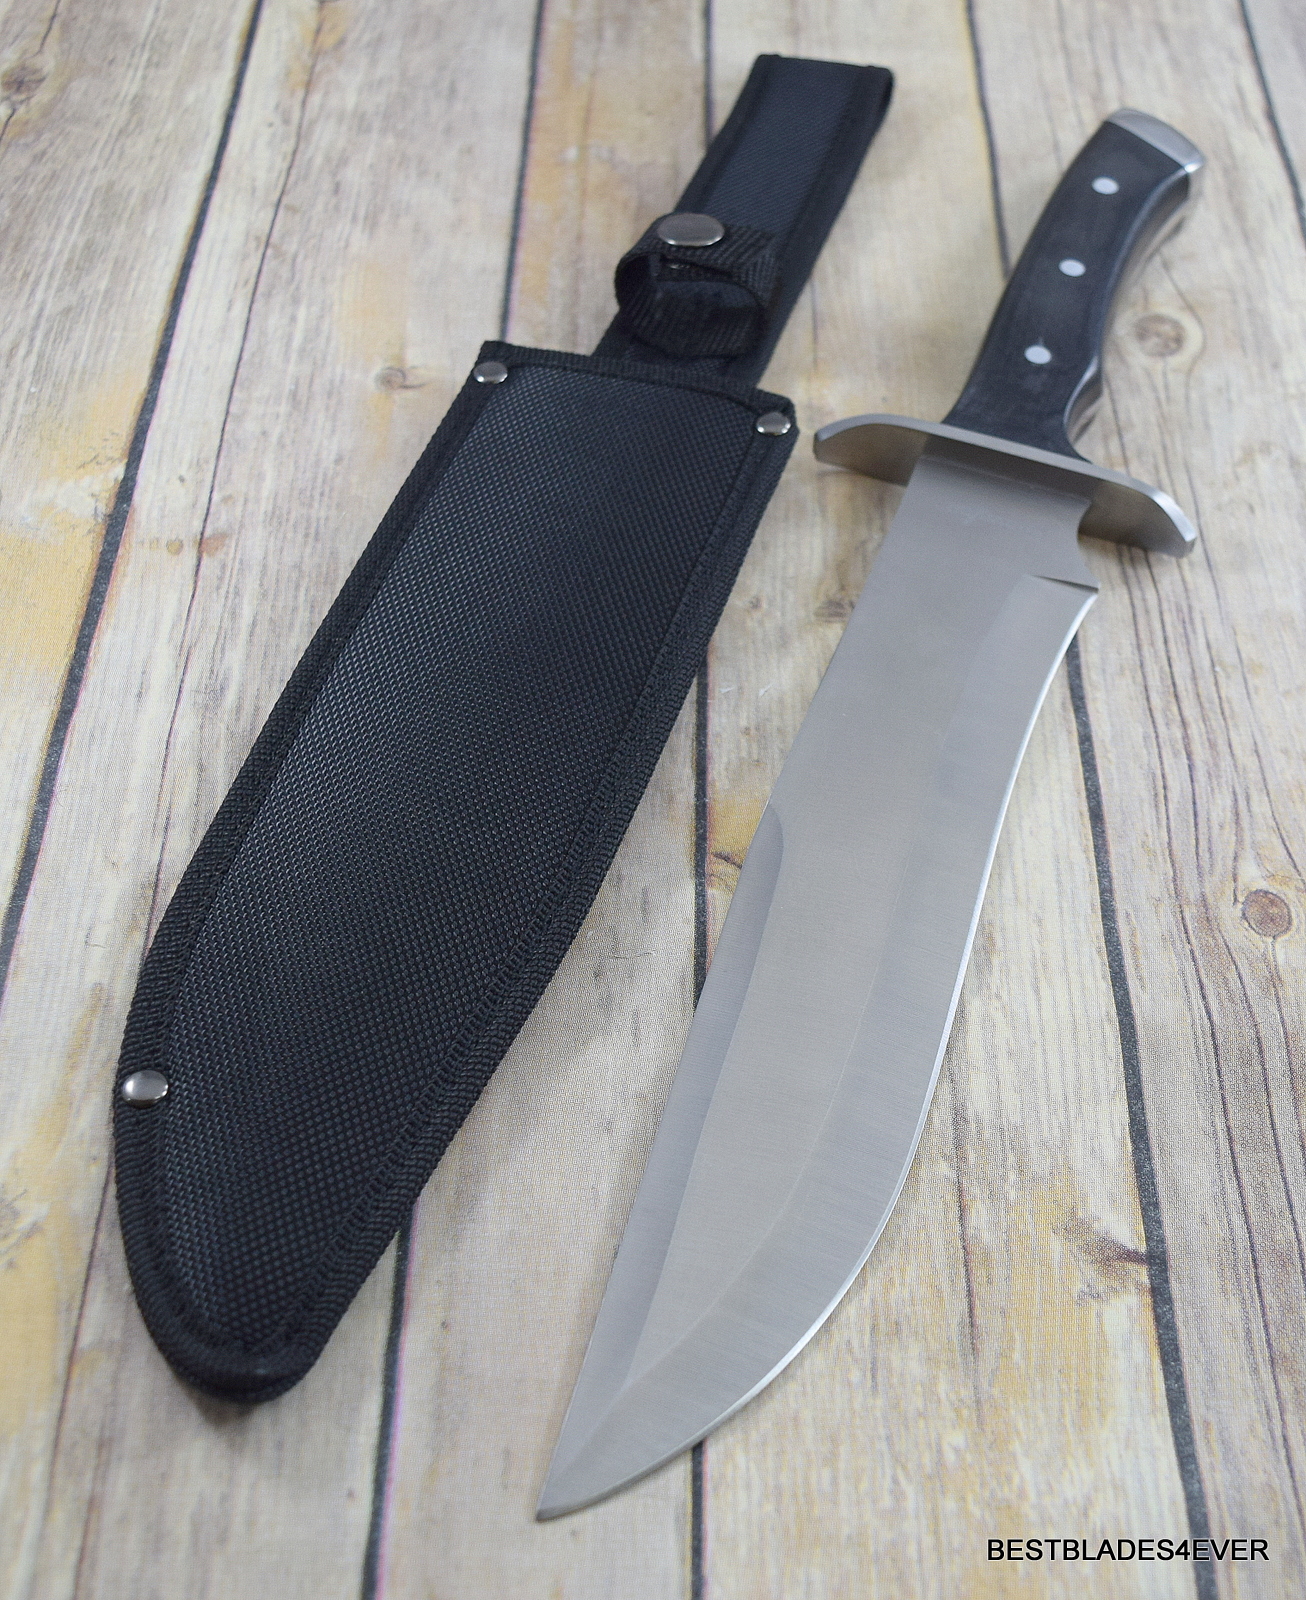  Bowie Knife Full Tang with Sheath, 13.25 Fixed Blade